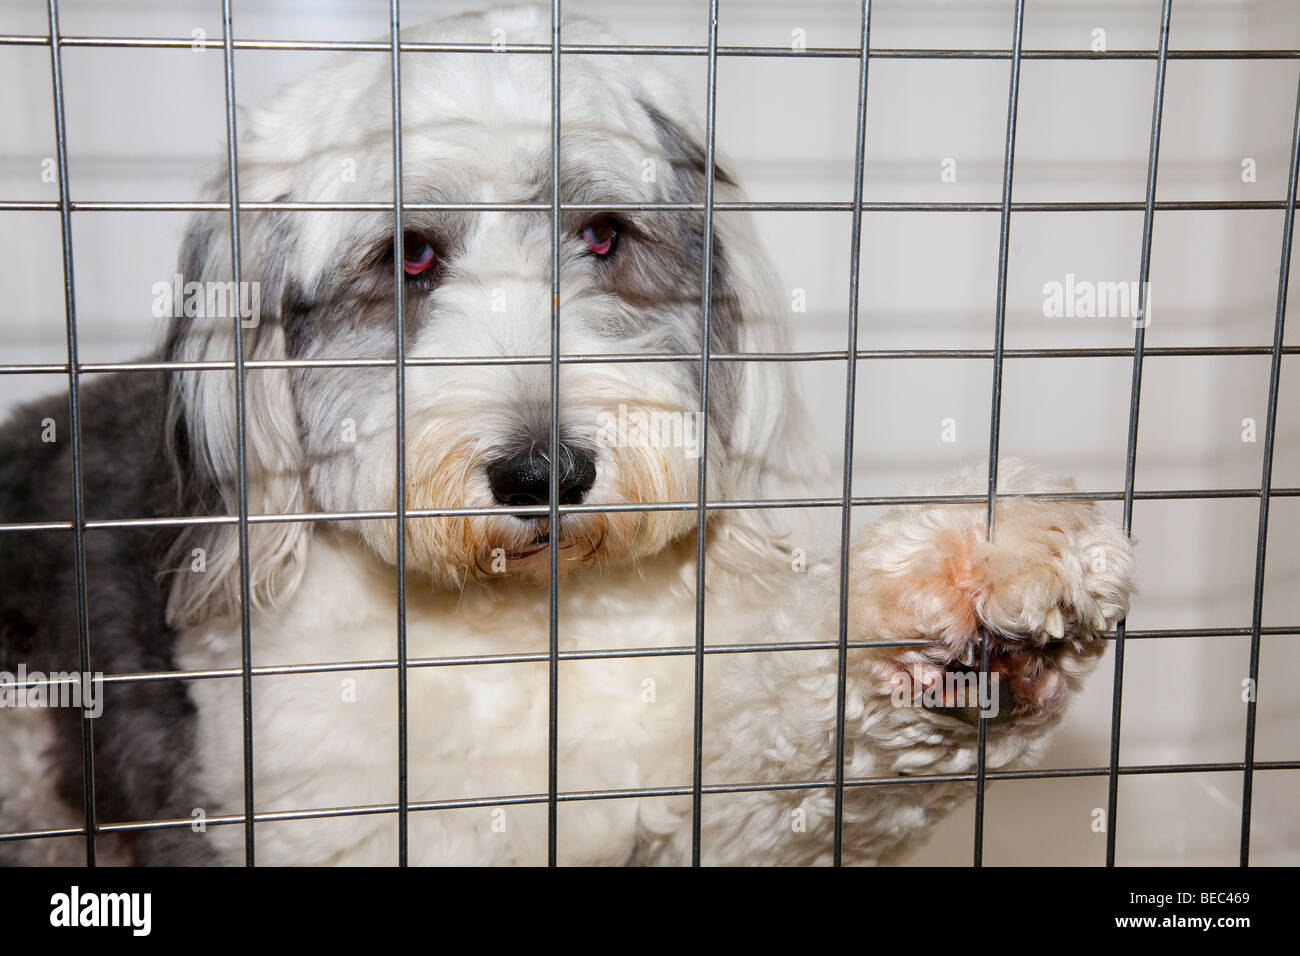 Old English Sheepdog in Kennel at Veterinary Clinic Stock Photo